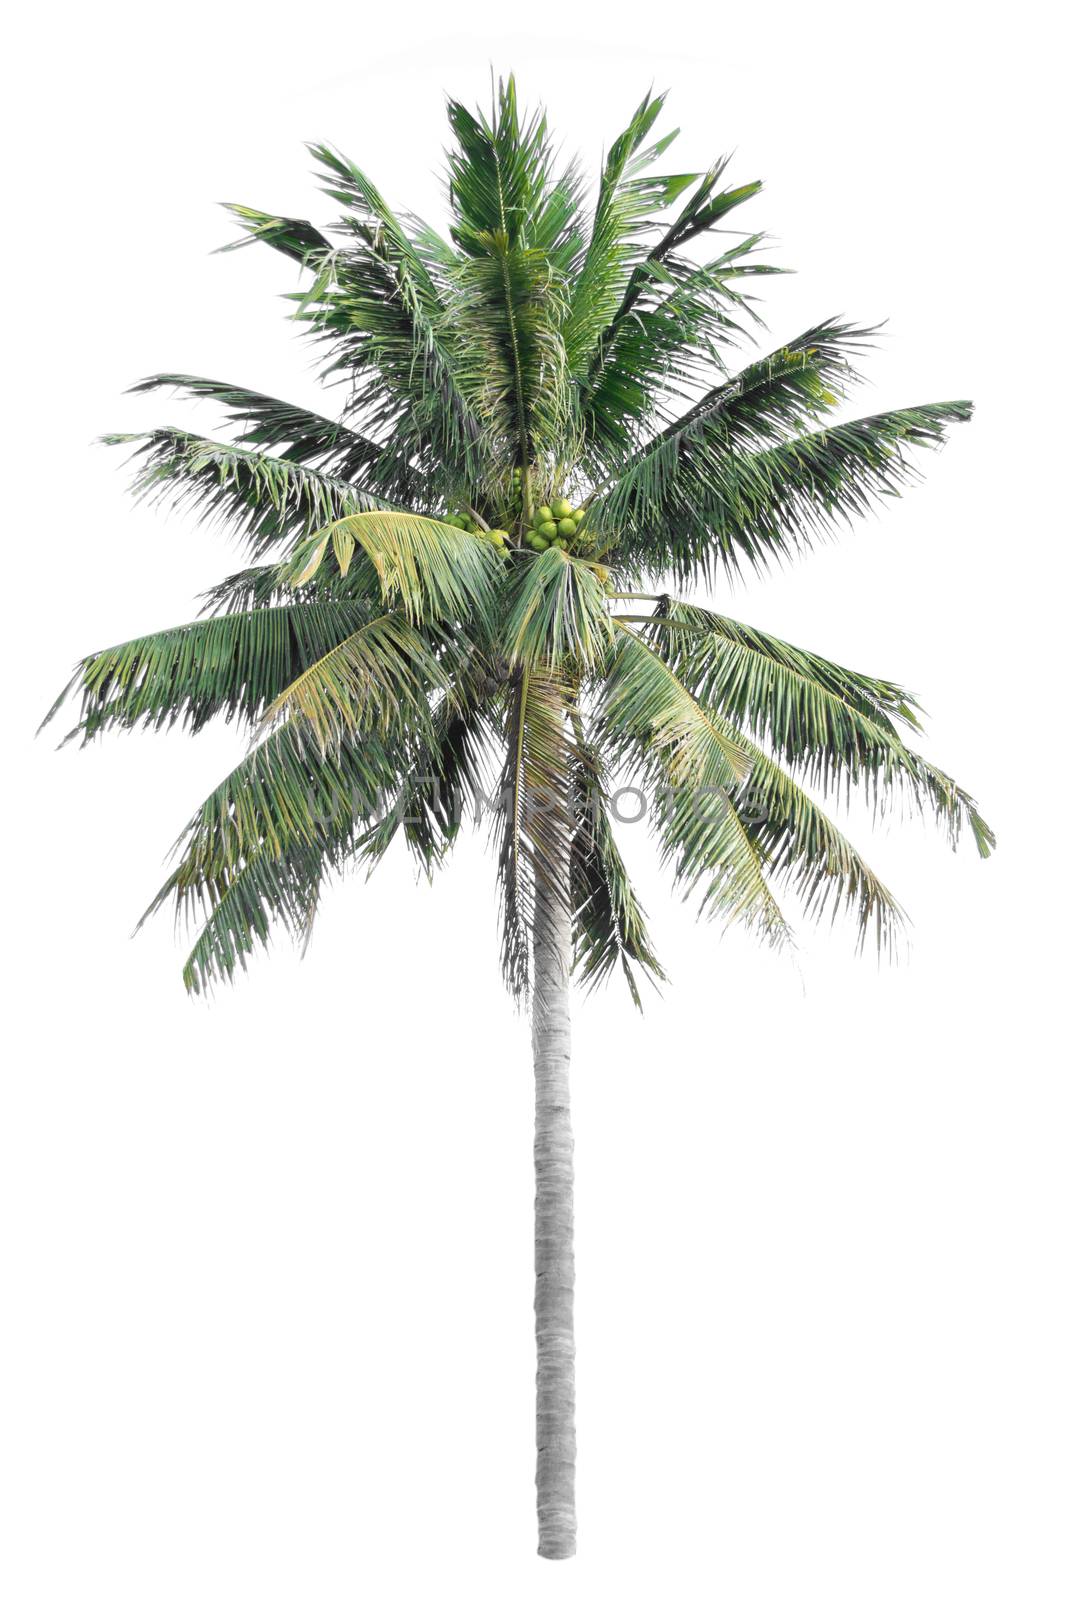 Coconut tree on a white background by Thanamat